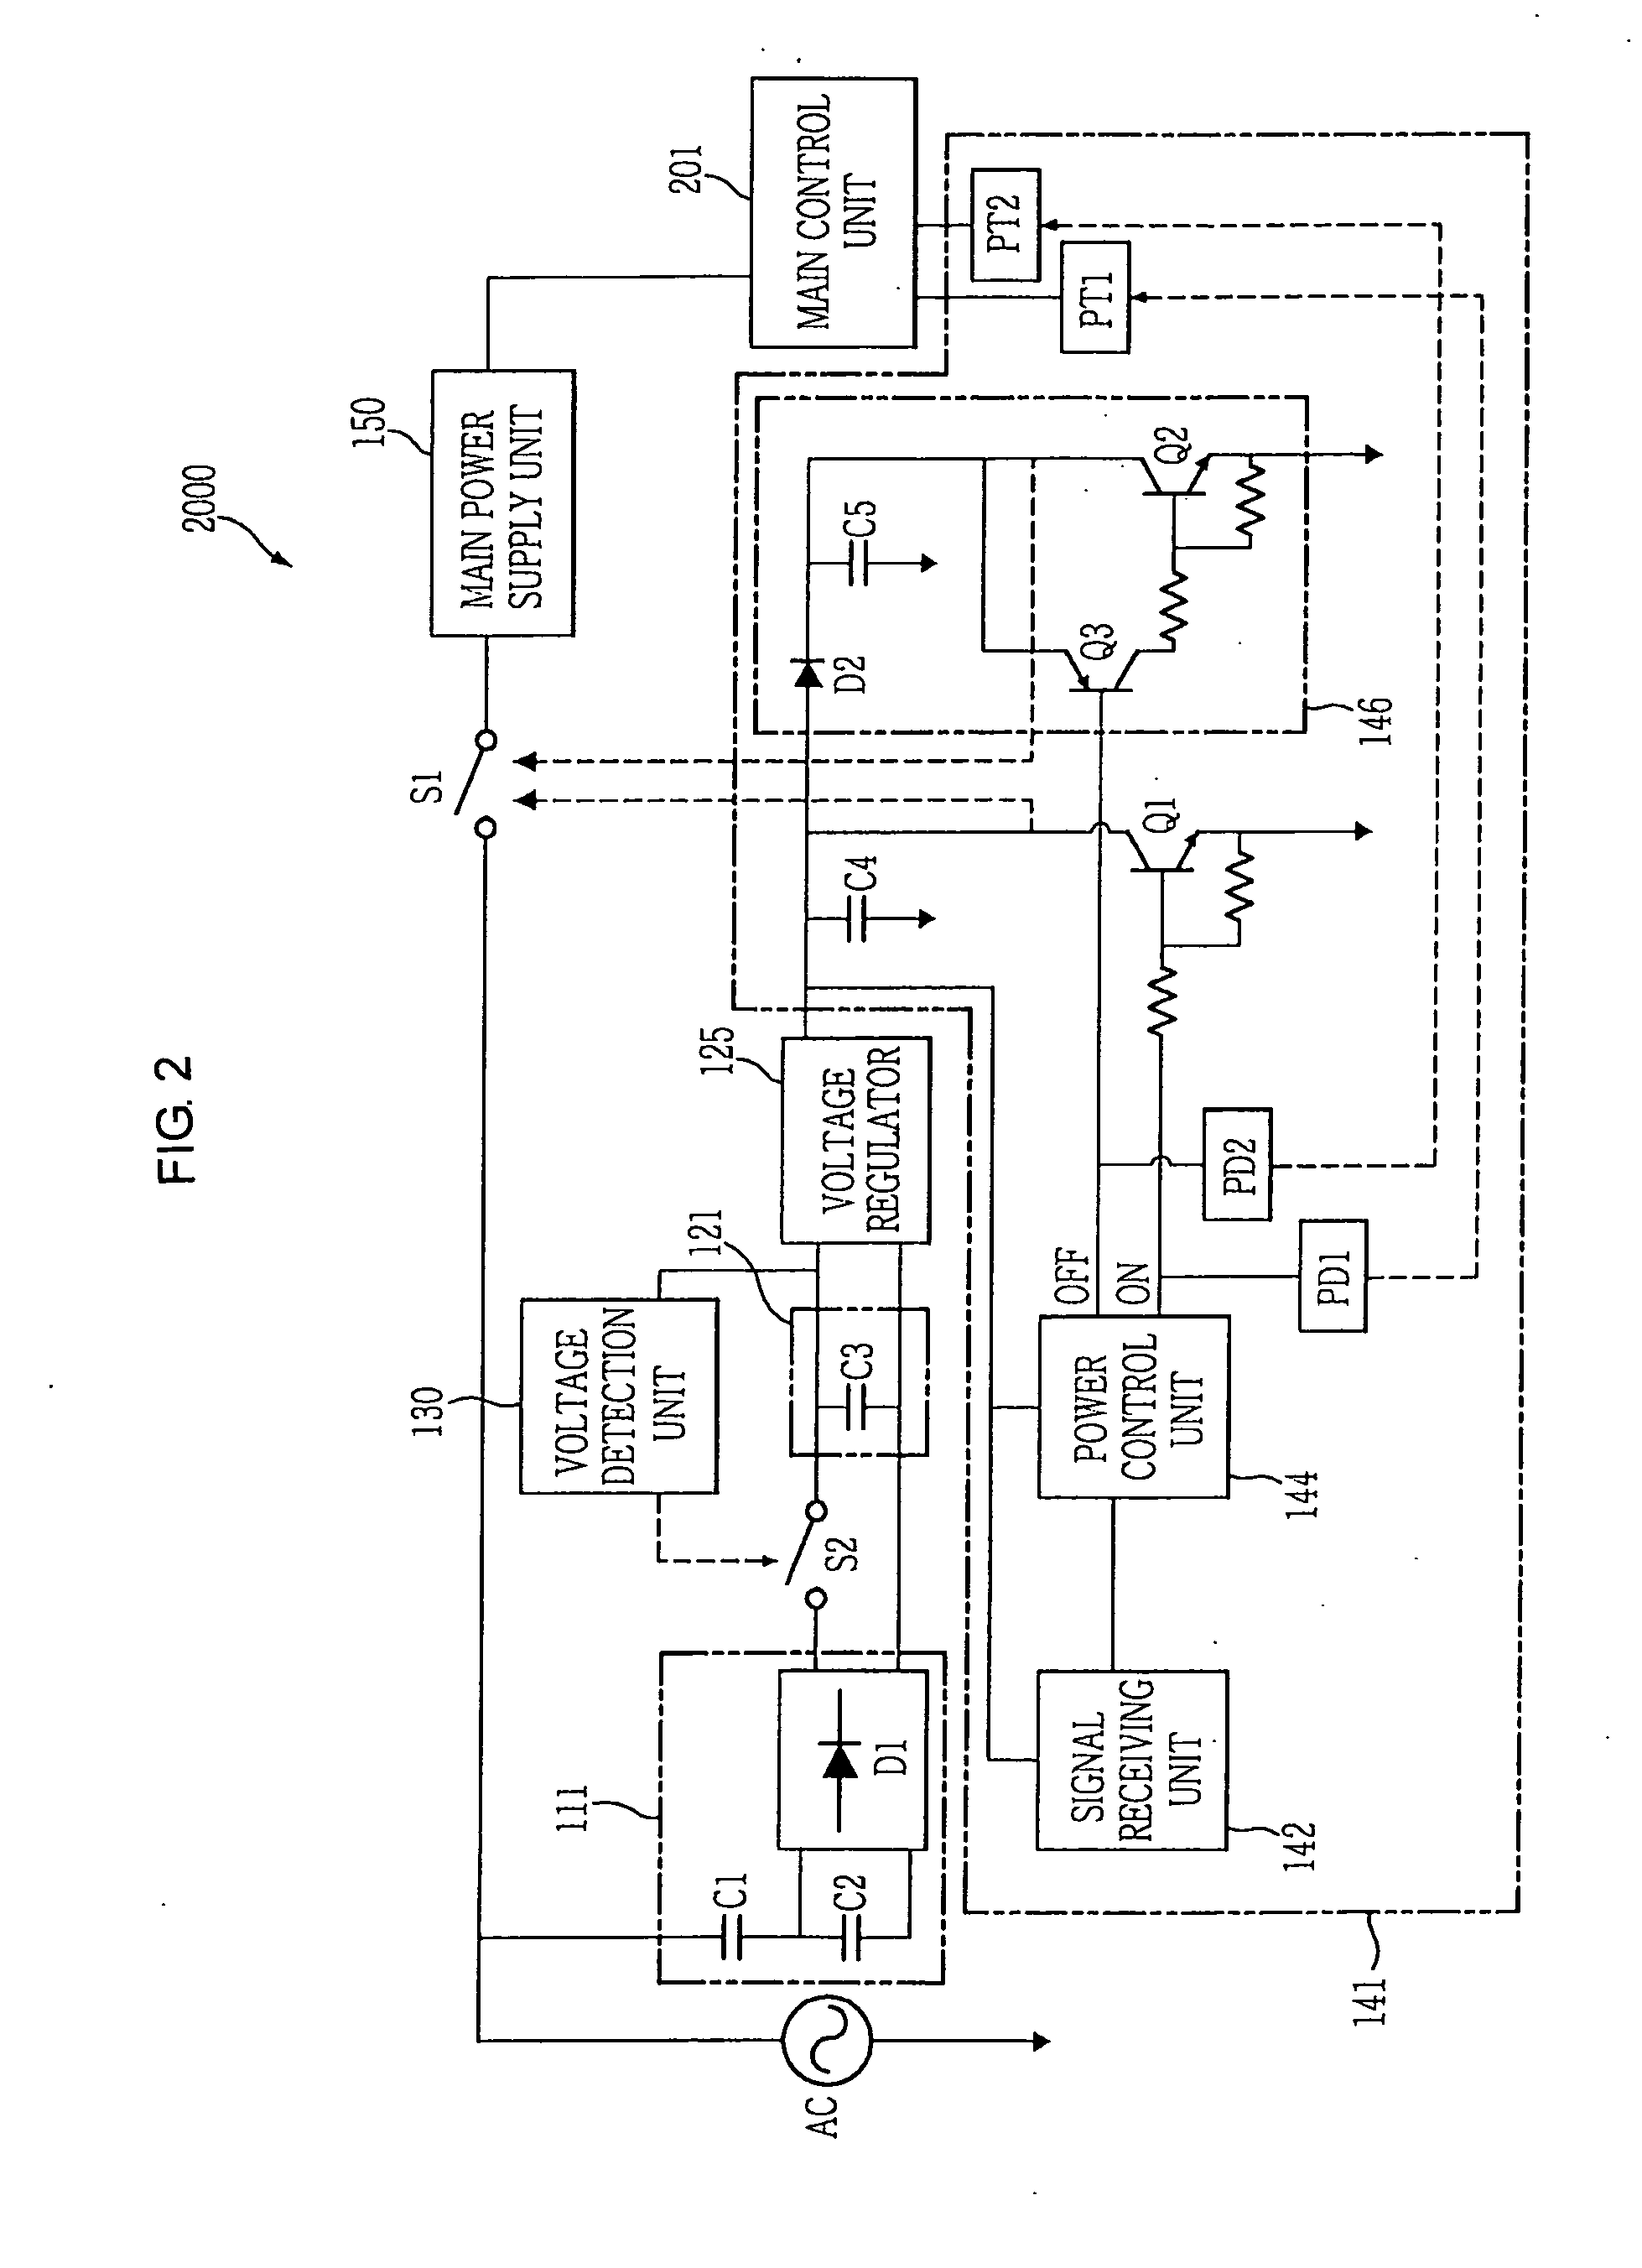 Electric power supply apparatus of electric apparatus